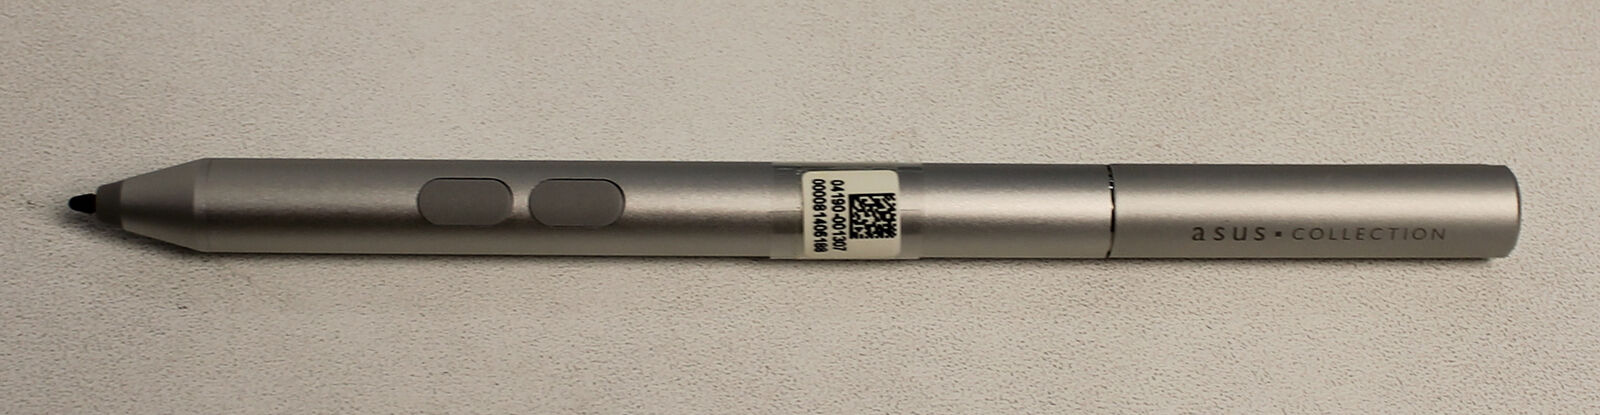 04190-00130800 Asus Stylus Pen Silver Tp401Na Series 